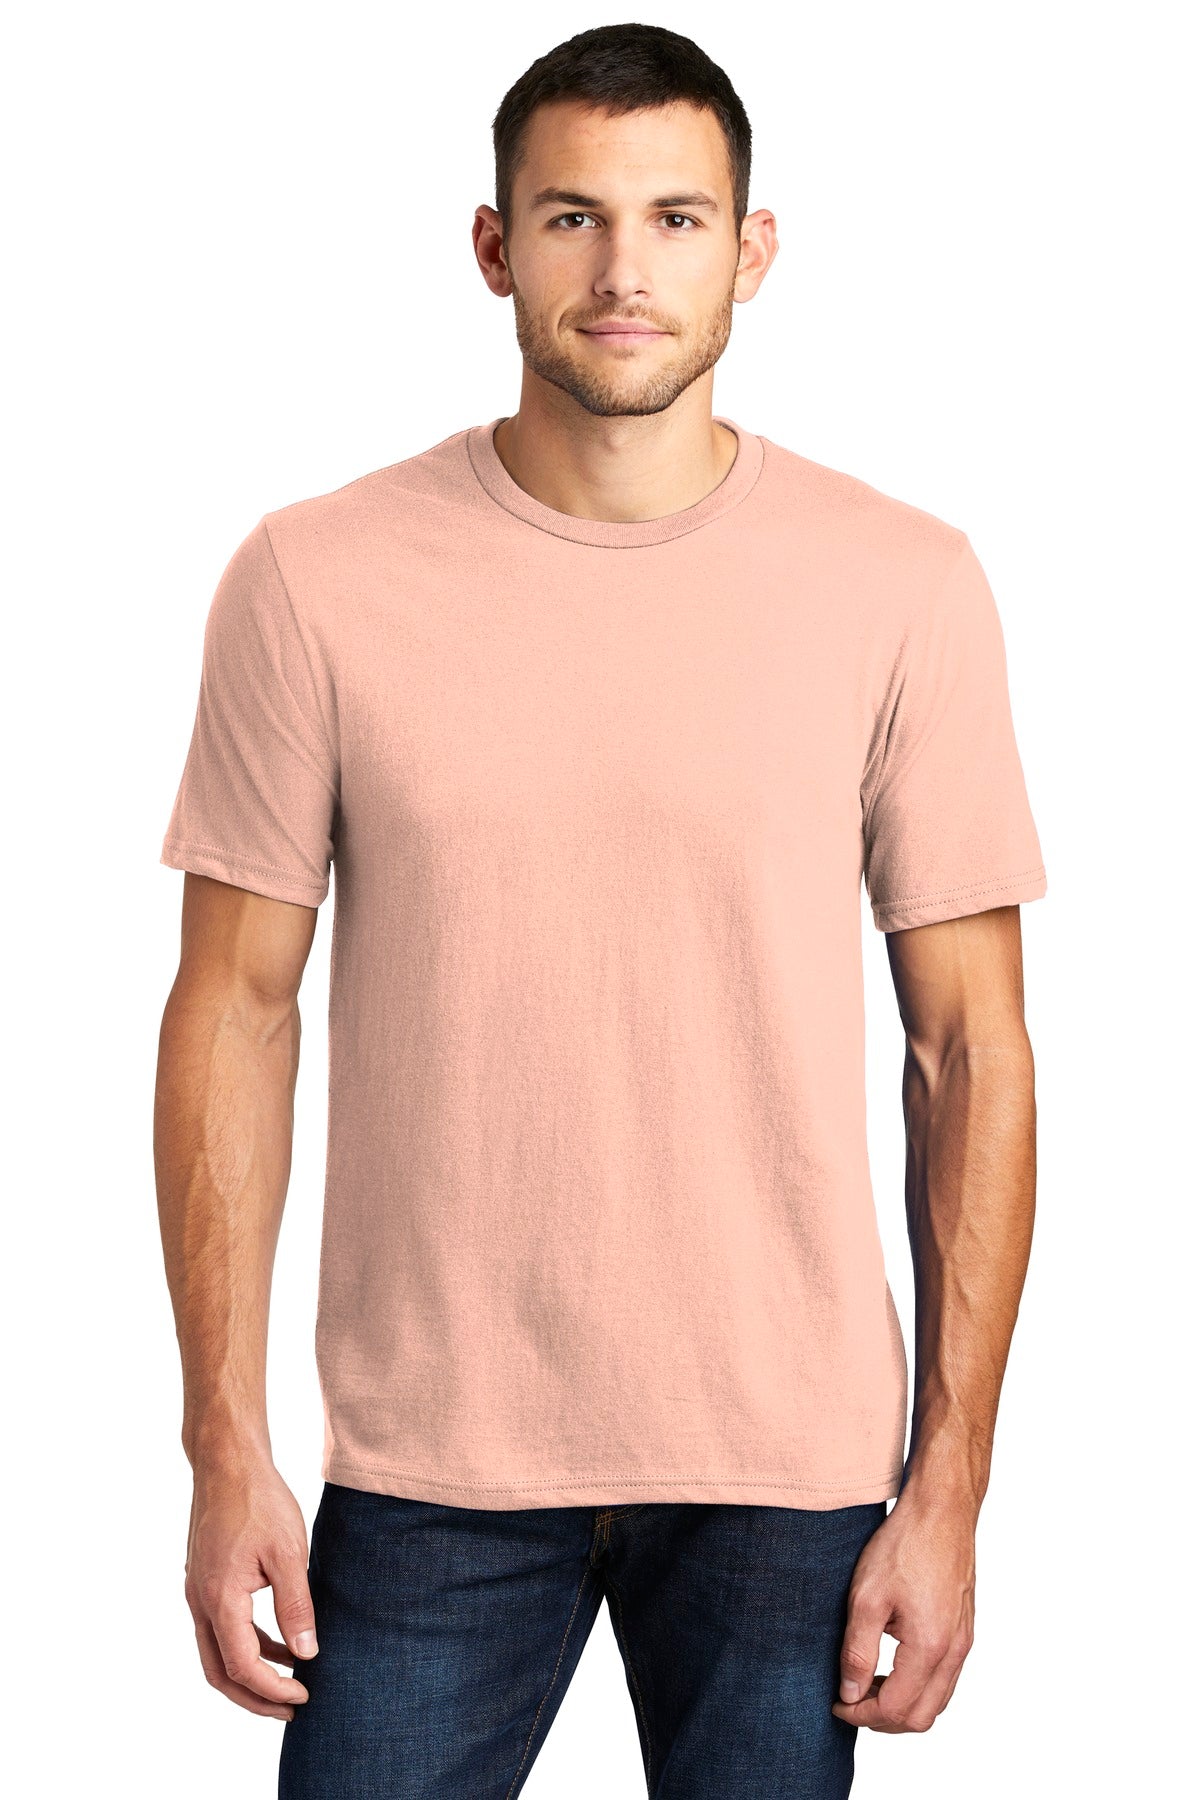 District® Very Important Tee®. DT6000 [Dusty Peach] - DFW Impression